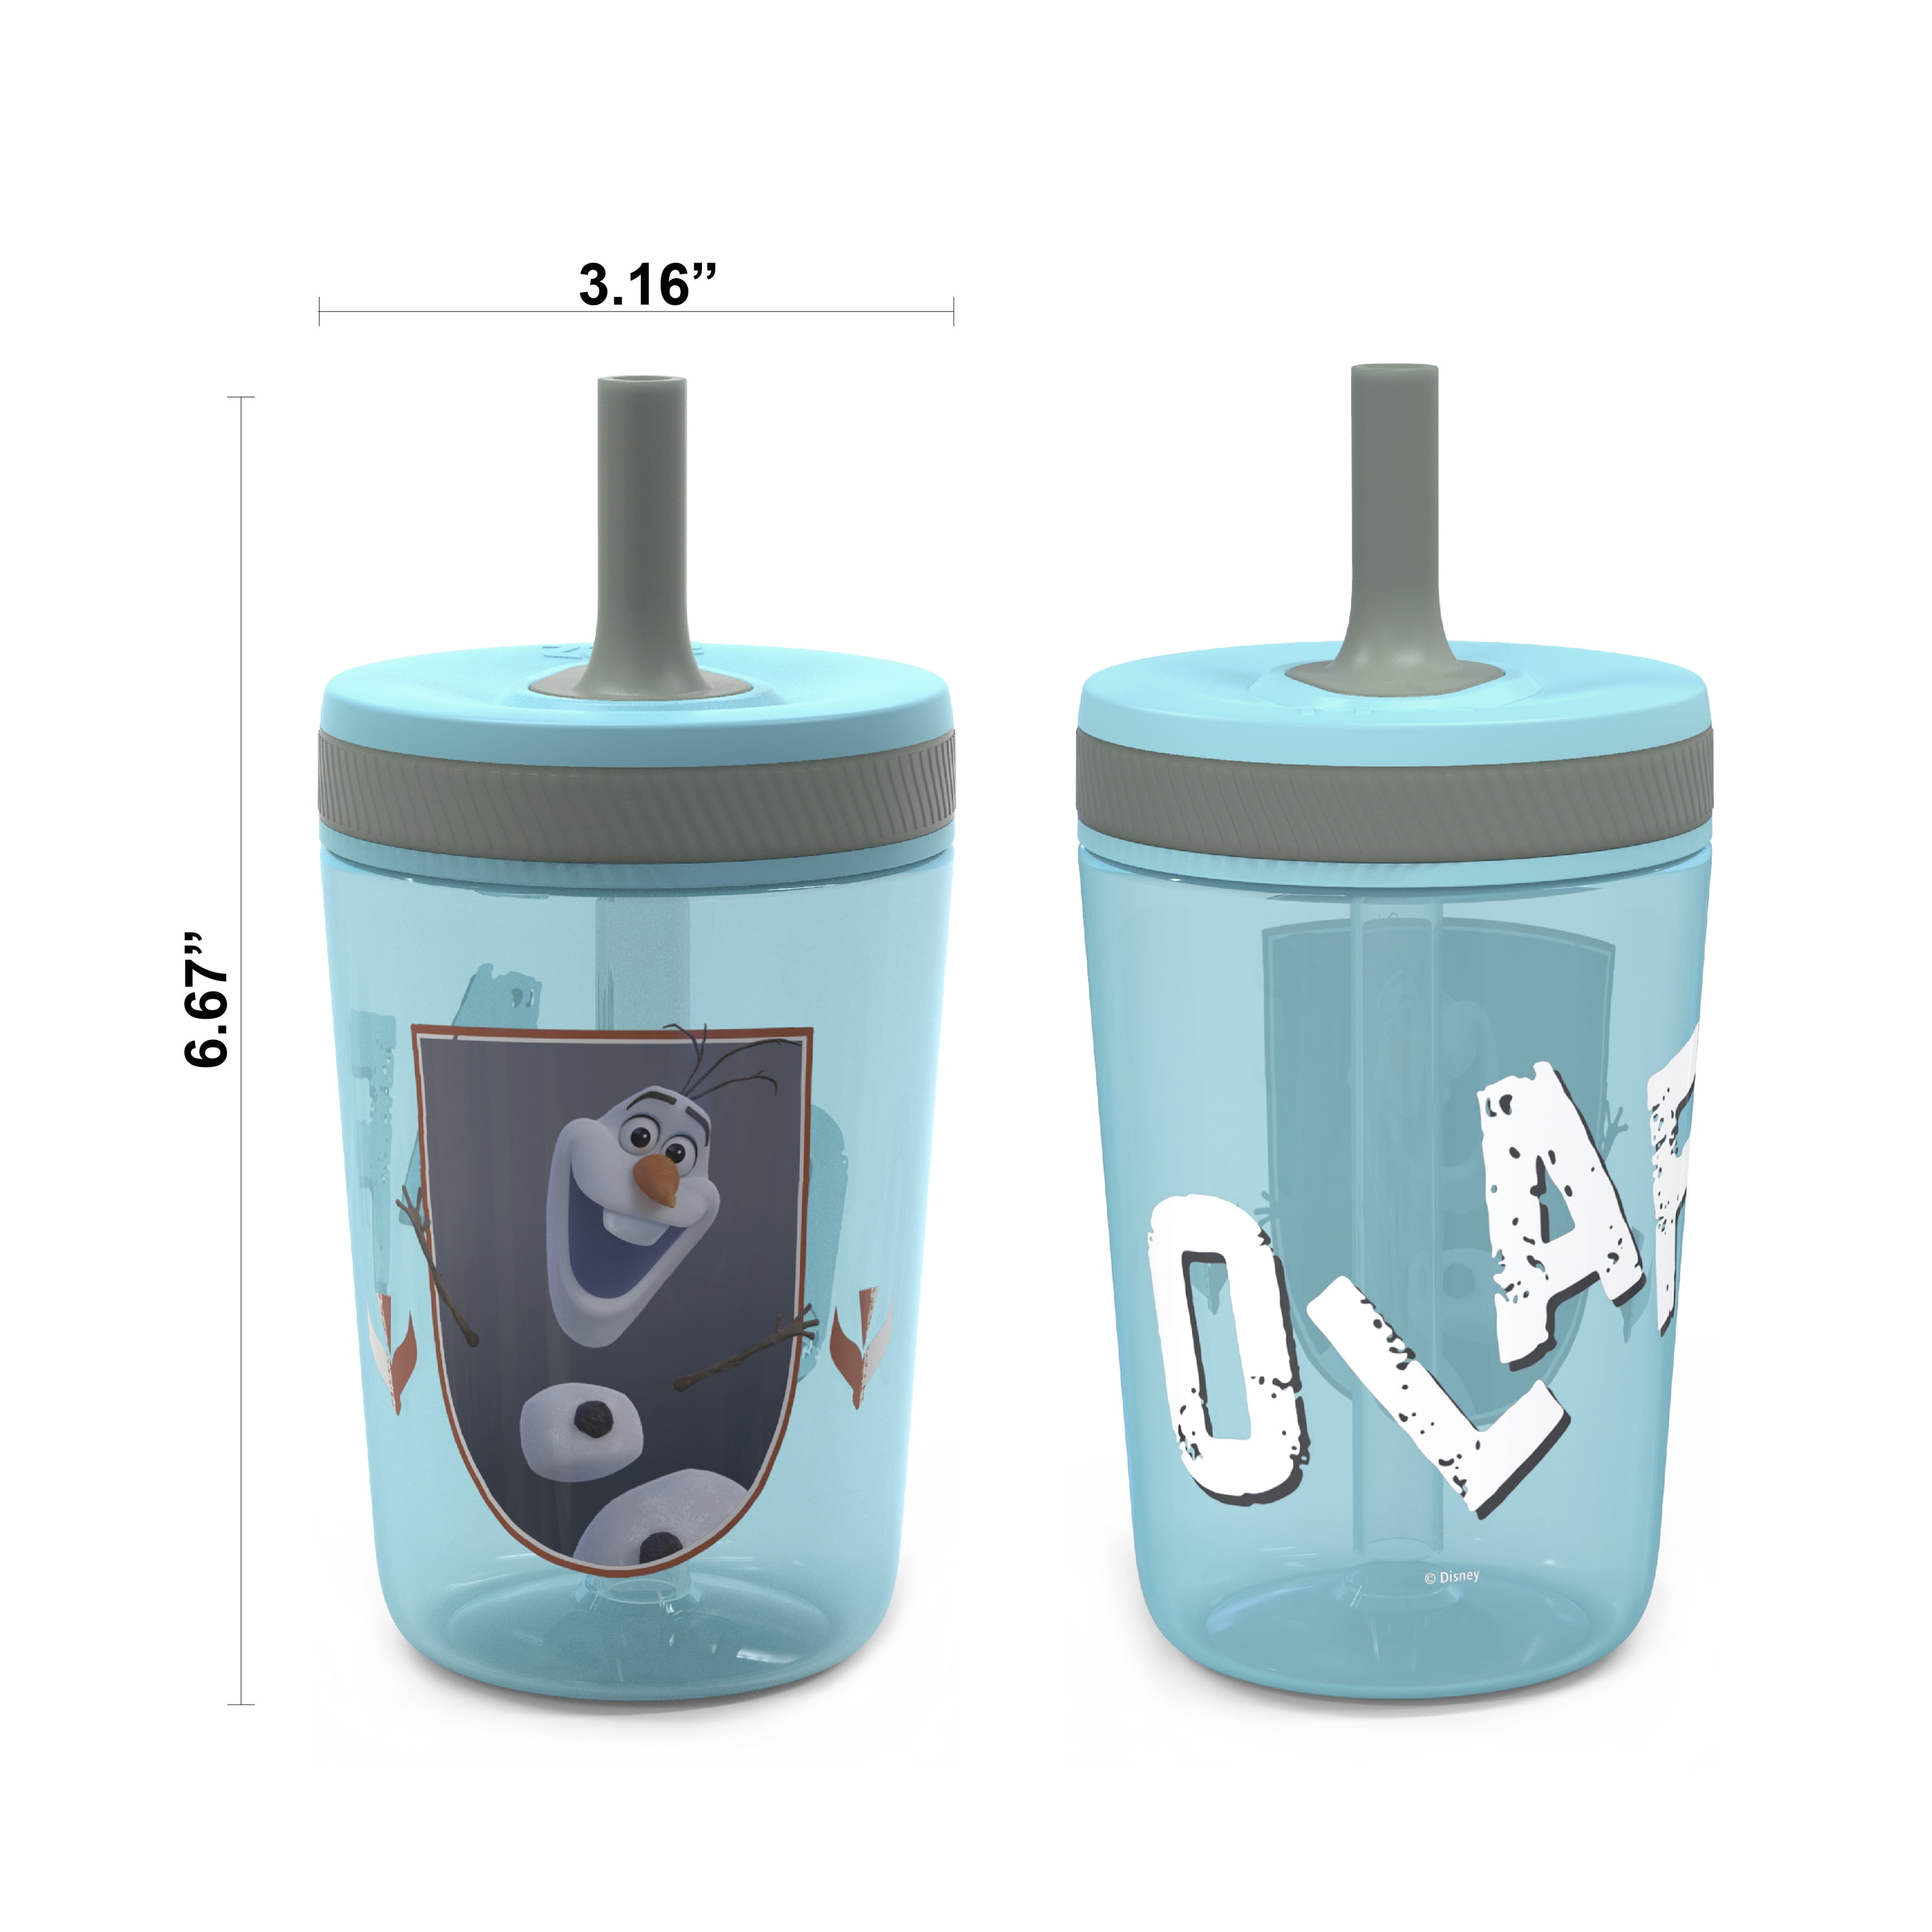 Zak Designs Kelso Tumbler 15 oz Set (Paw Patrol - Chase & Marshall 2pc Set)  Toddlers Cups Non-BPA Le…See more Zak Designs Kelso Tumbler 15 oz Set (Paw